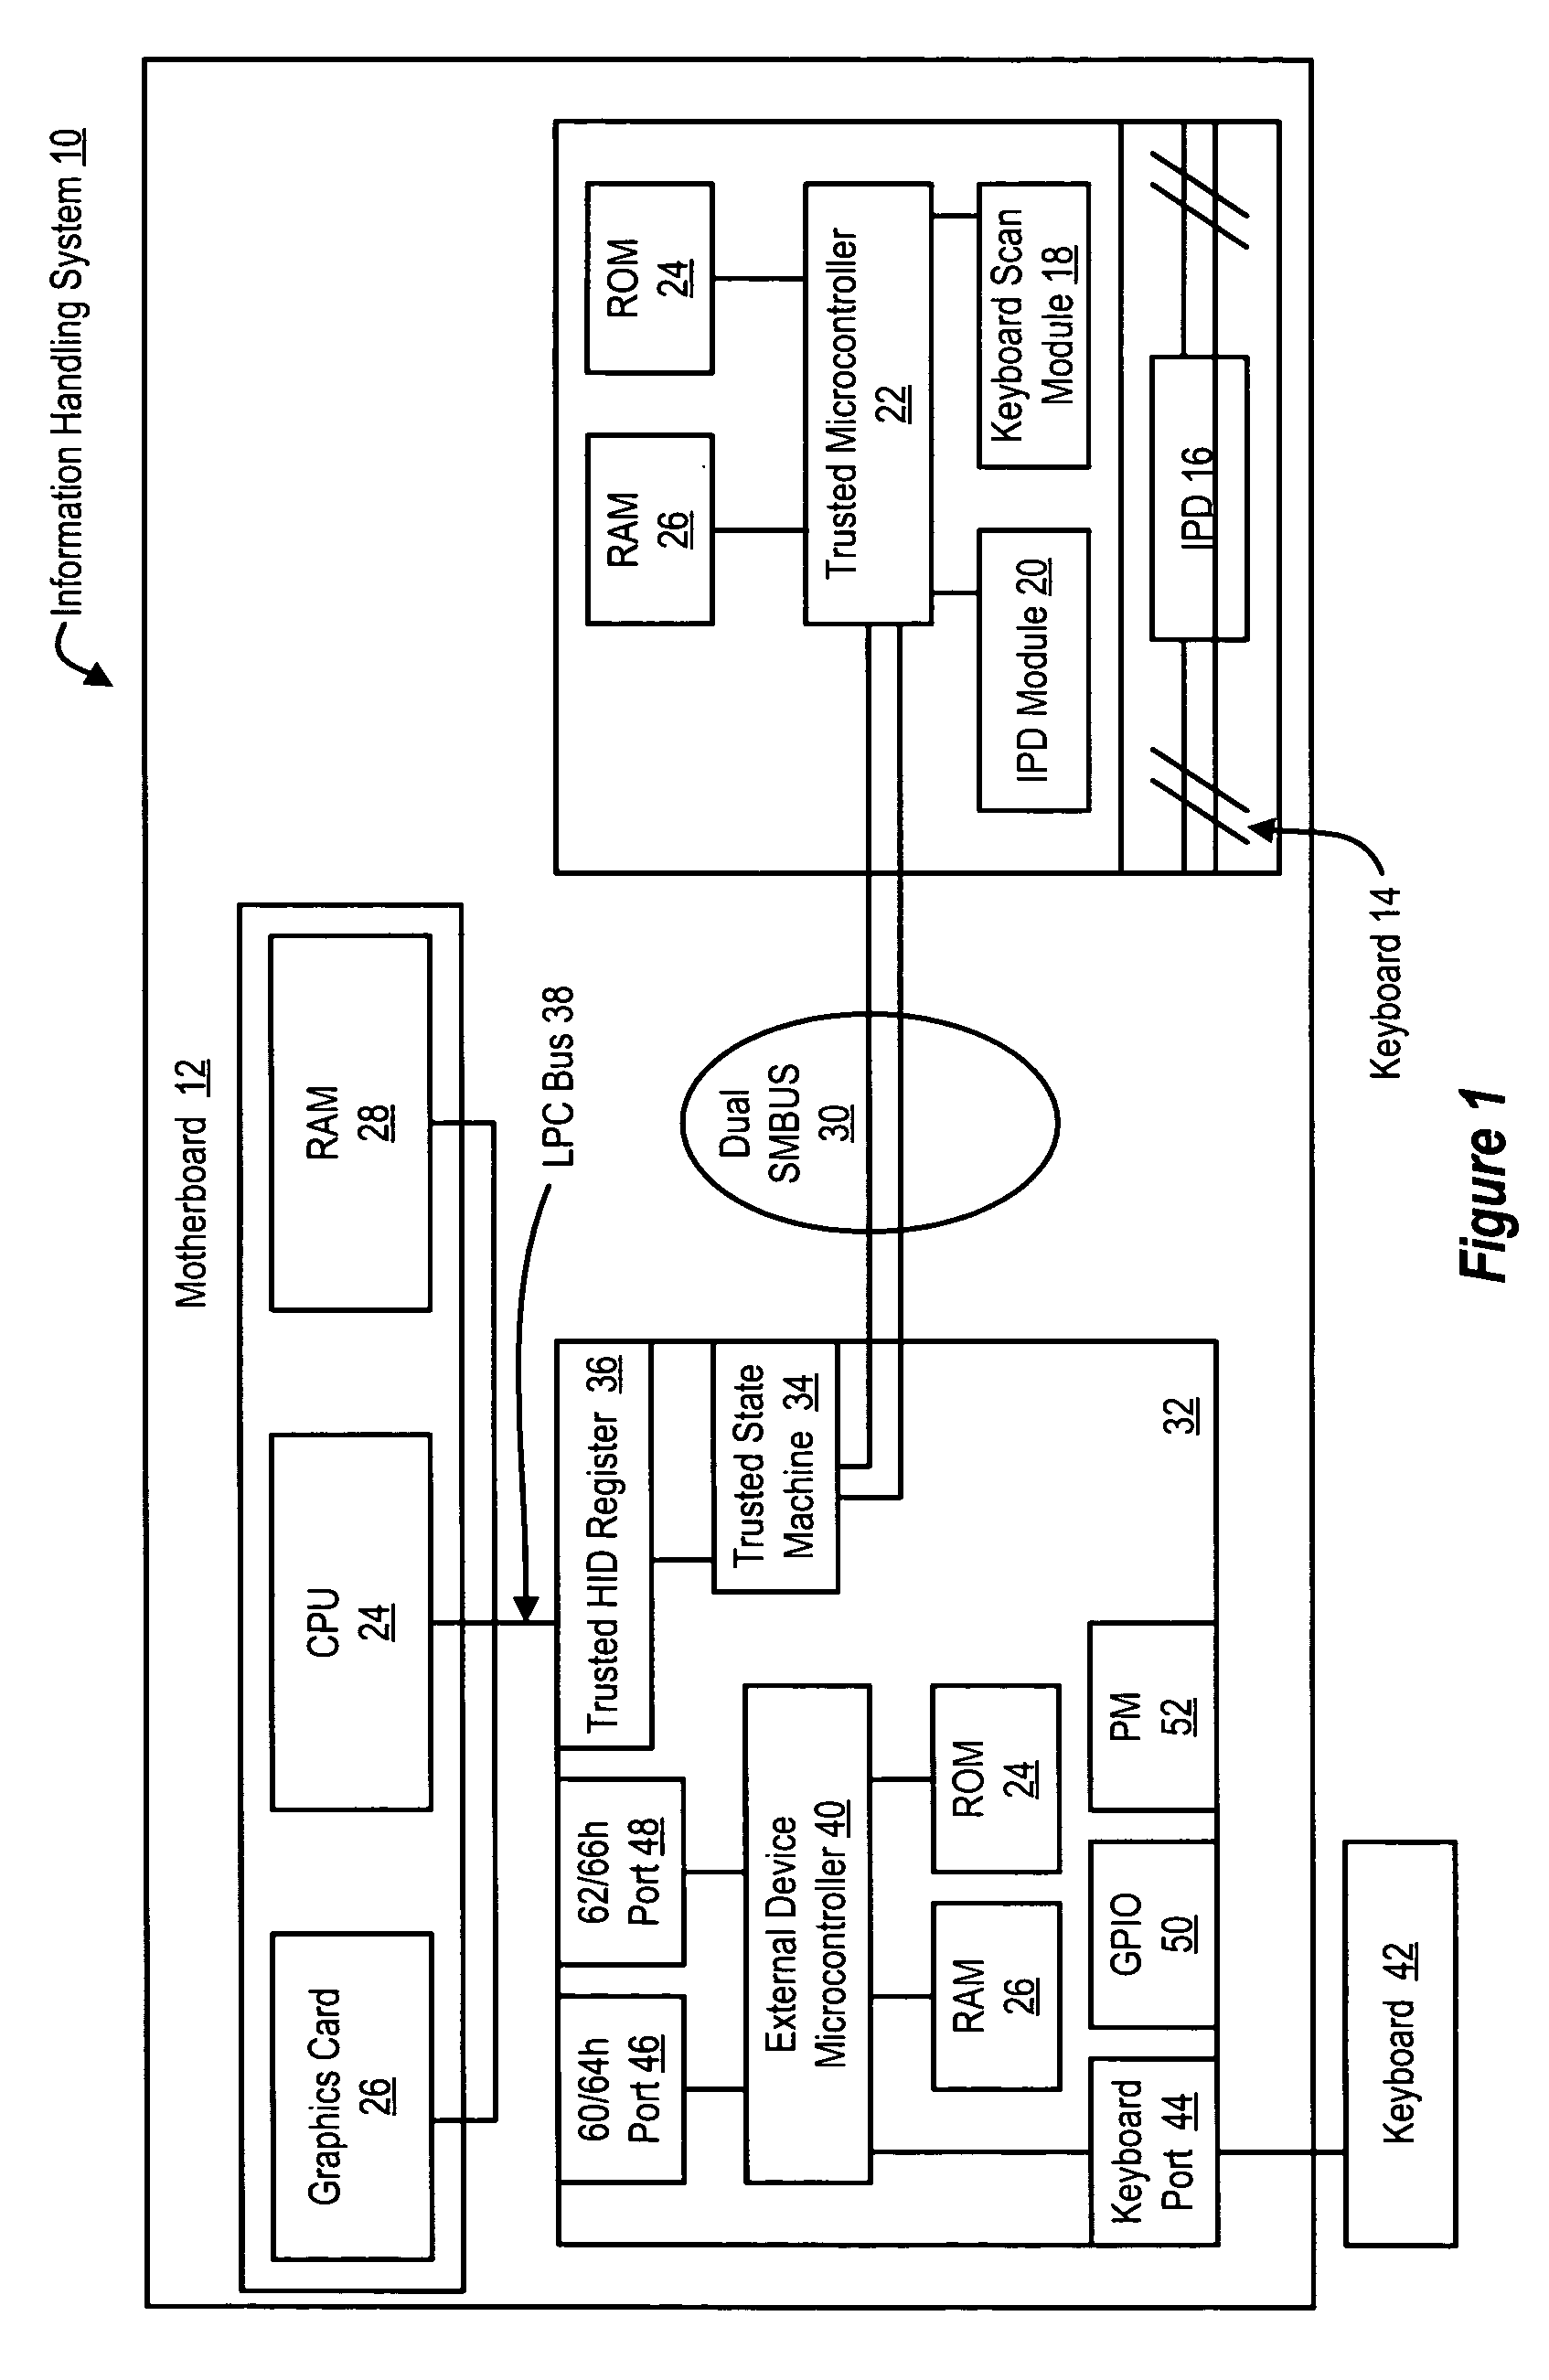 System and method for communication of keyboard and touchpad inputs as HID packets embedded on a SMBus